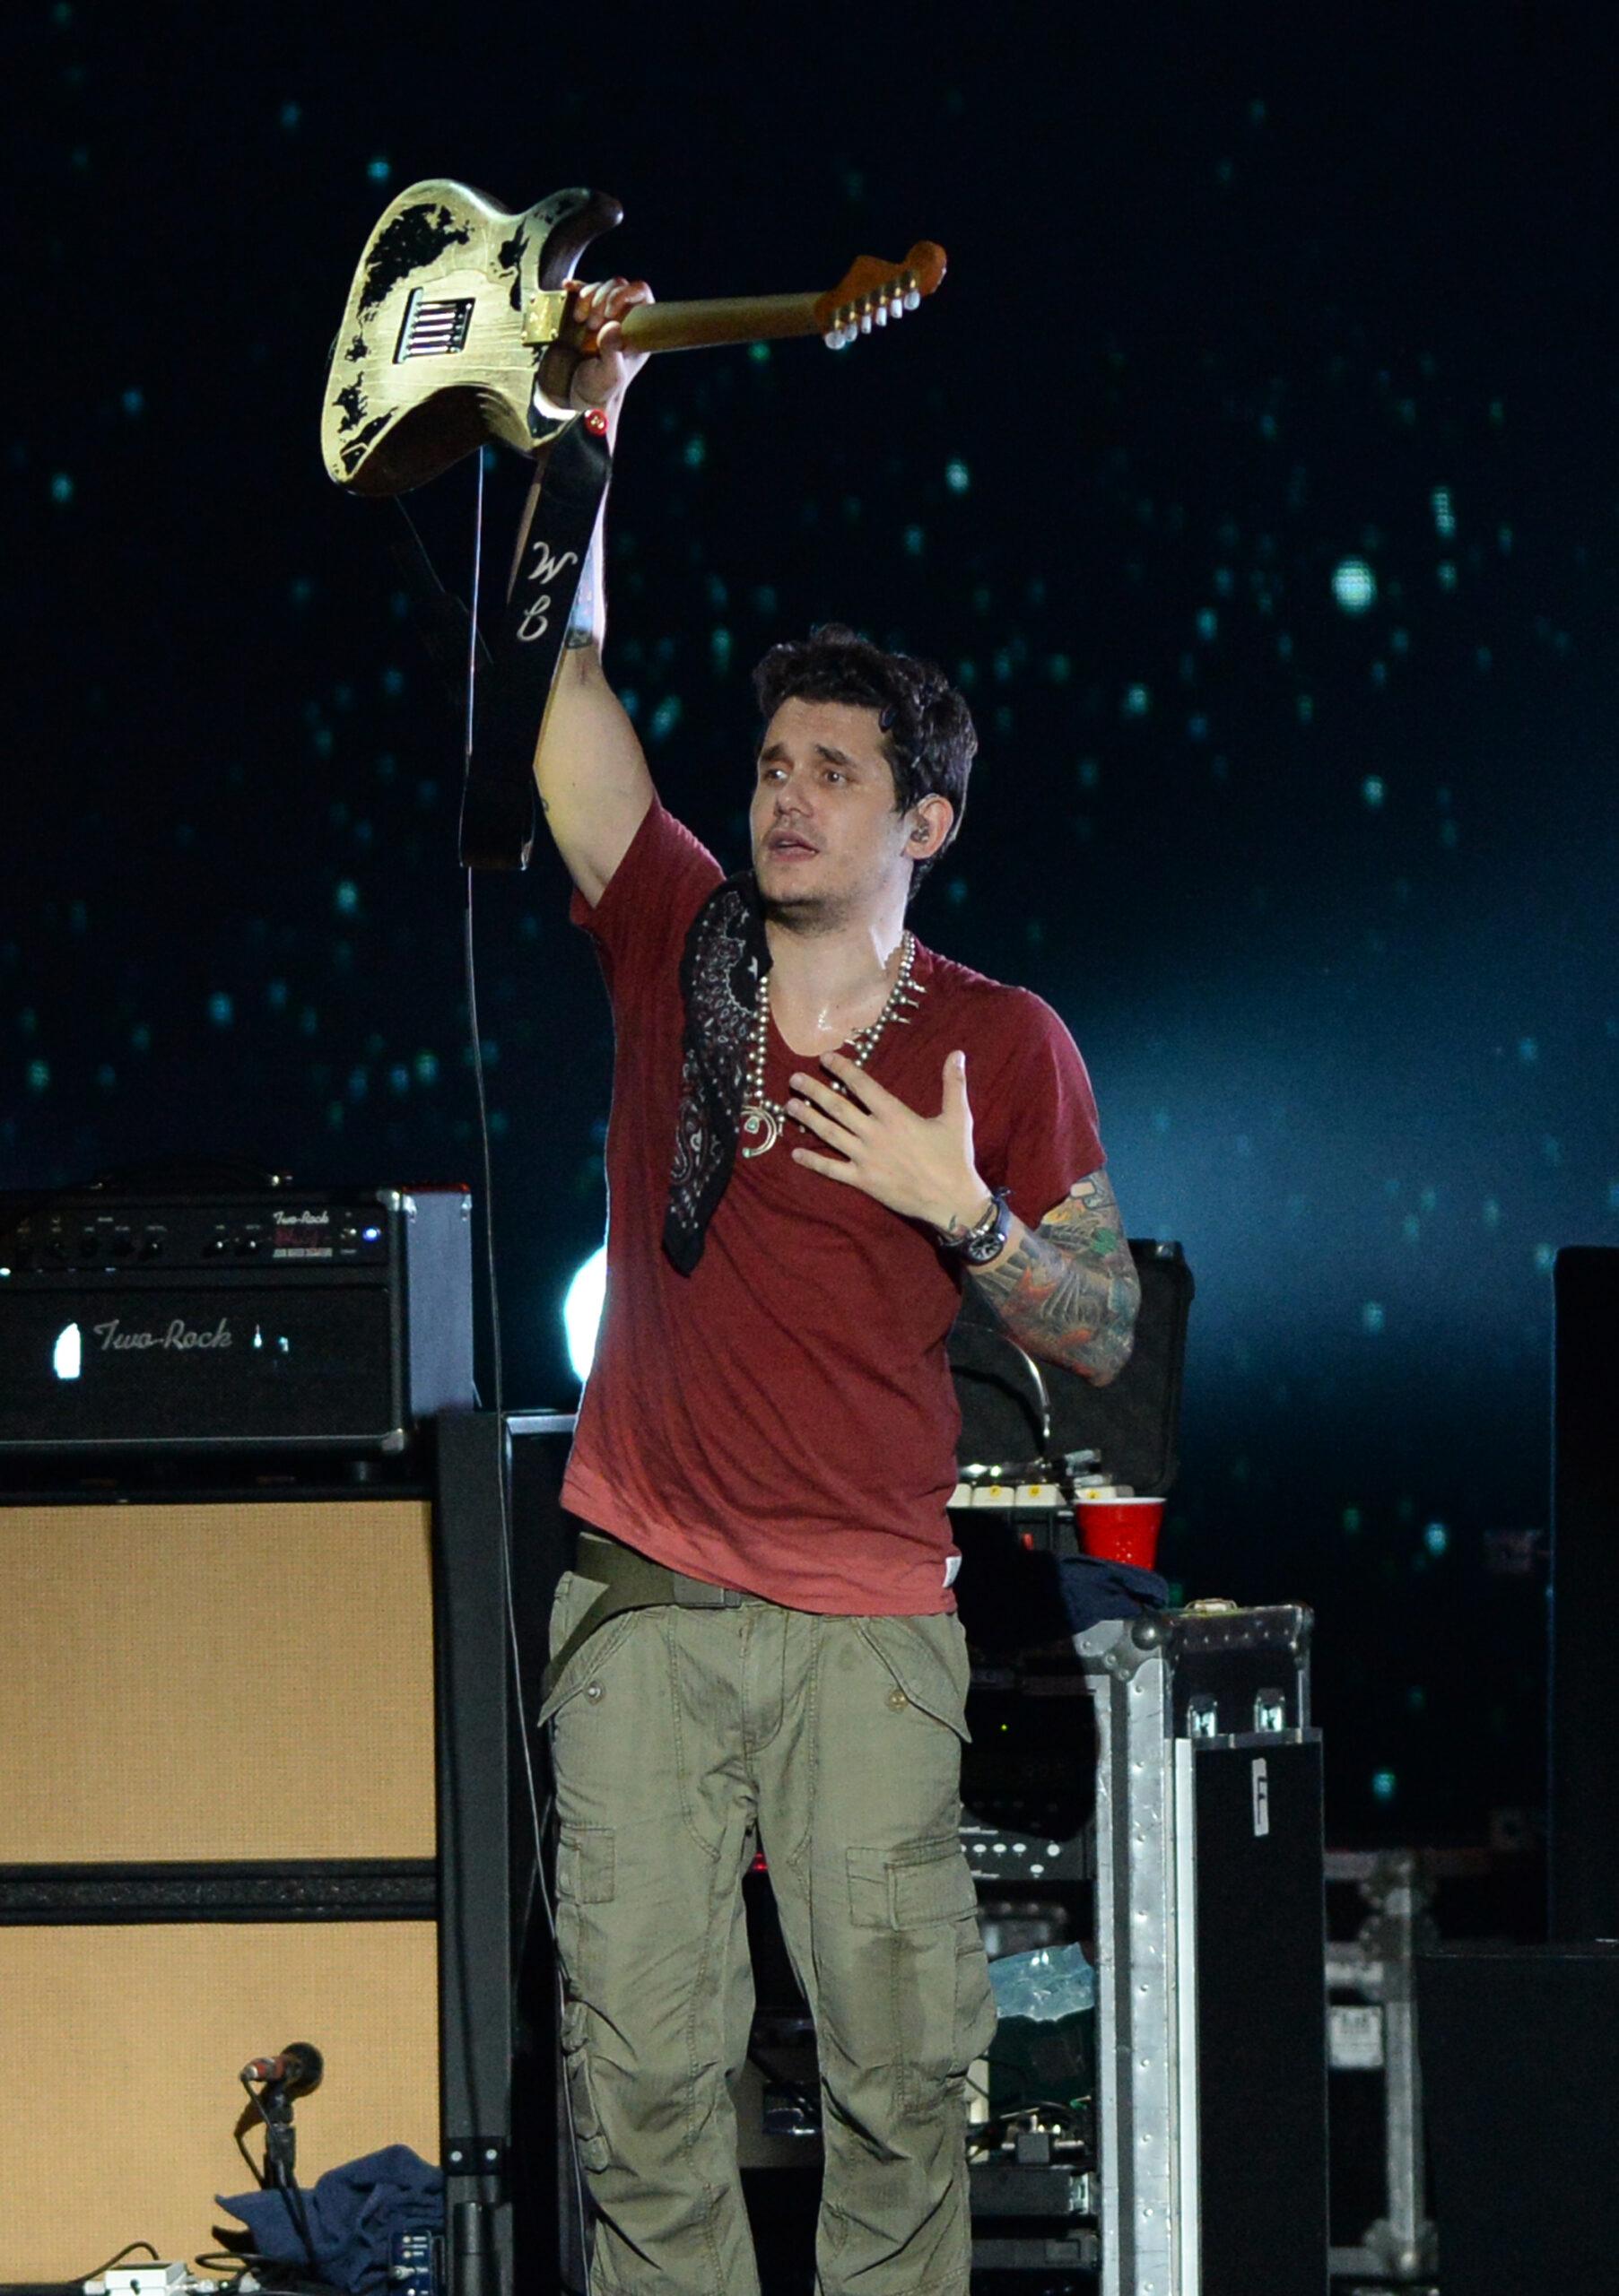 John Mayer performs Born and Raised World Tour 2013 with Katy Perry watching from backstage in West Palm Beach